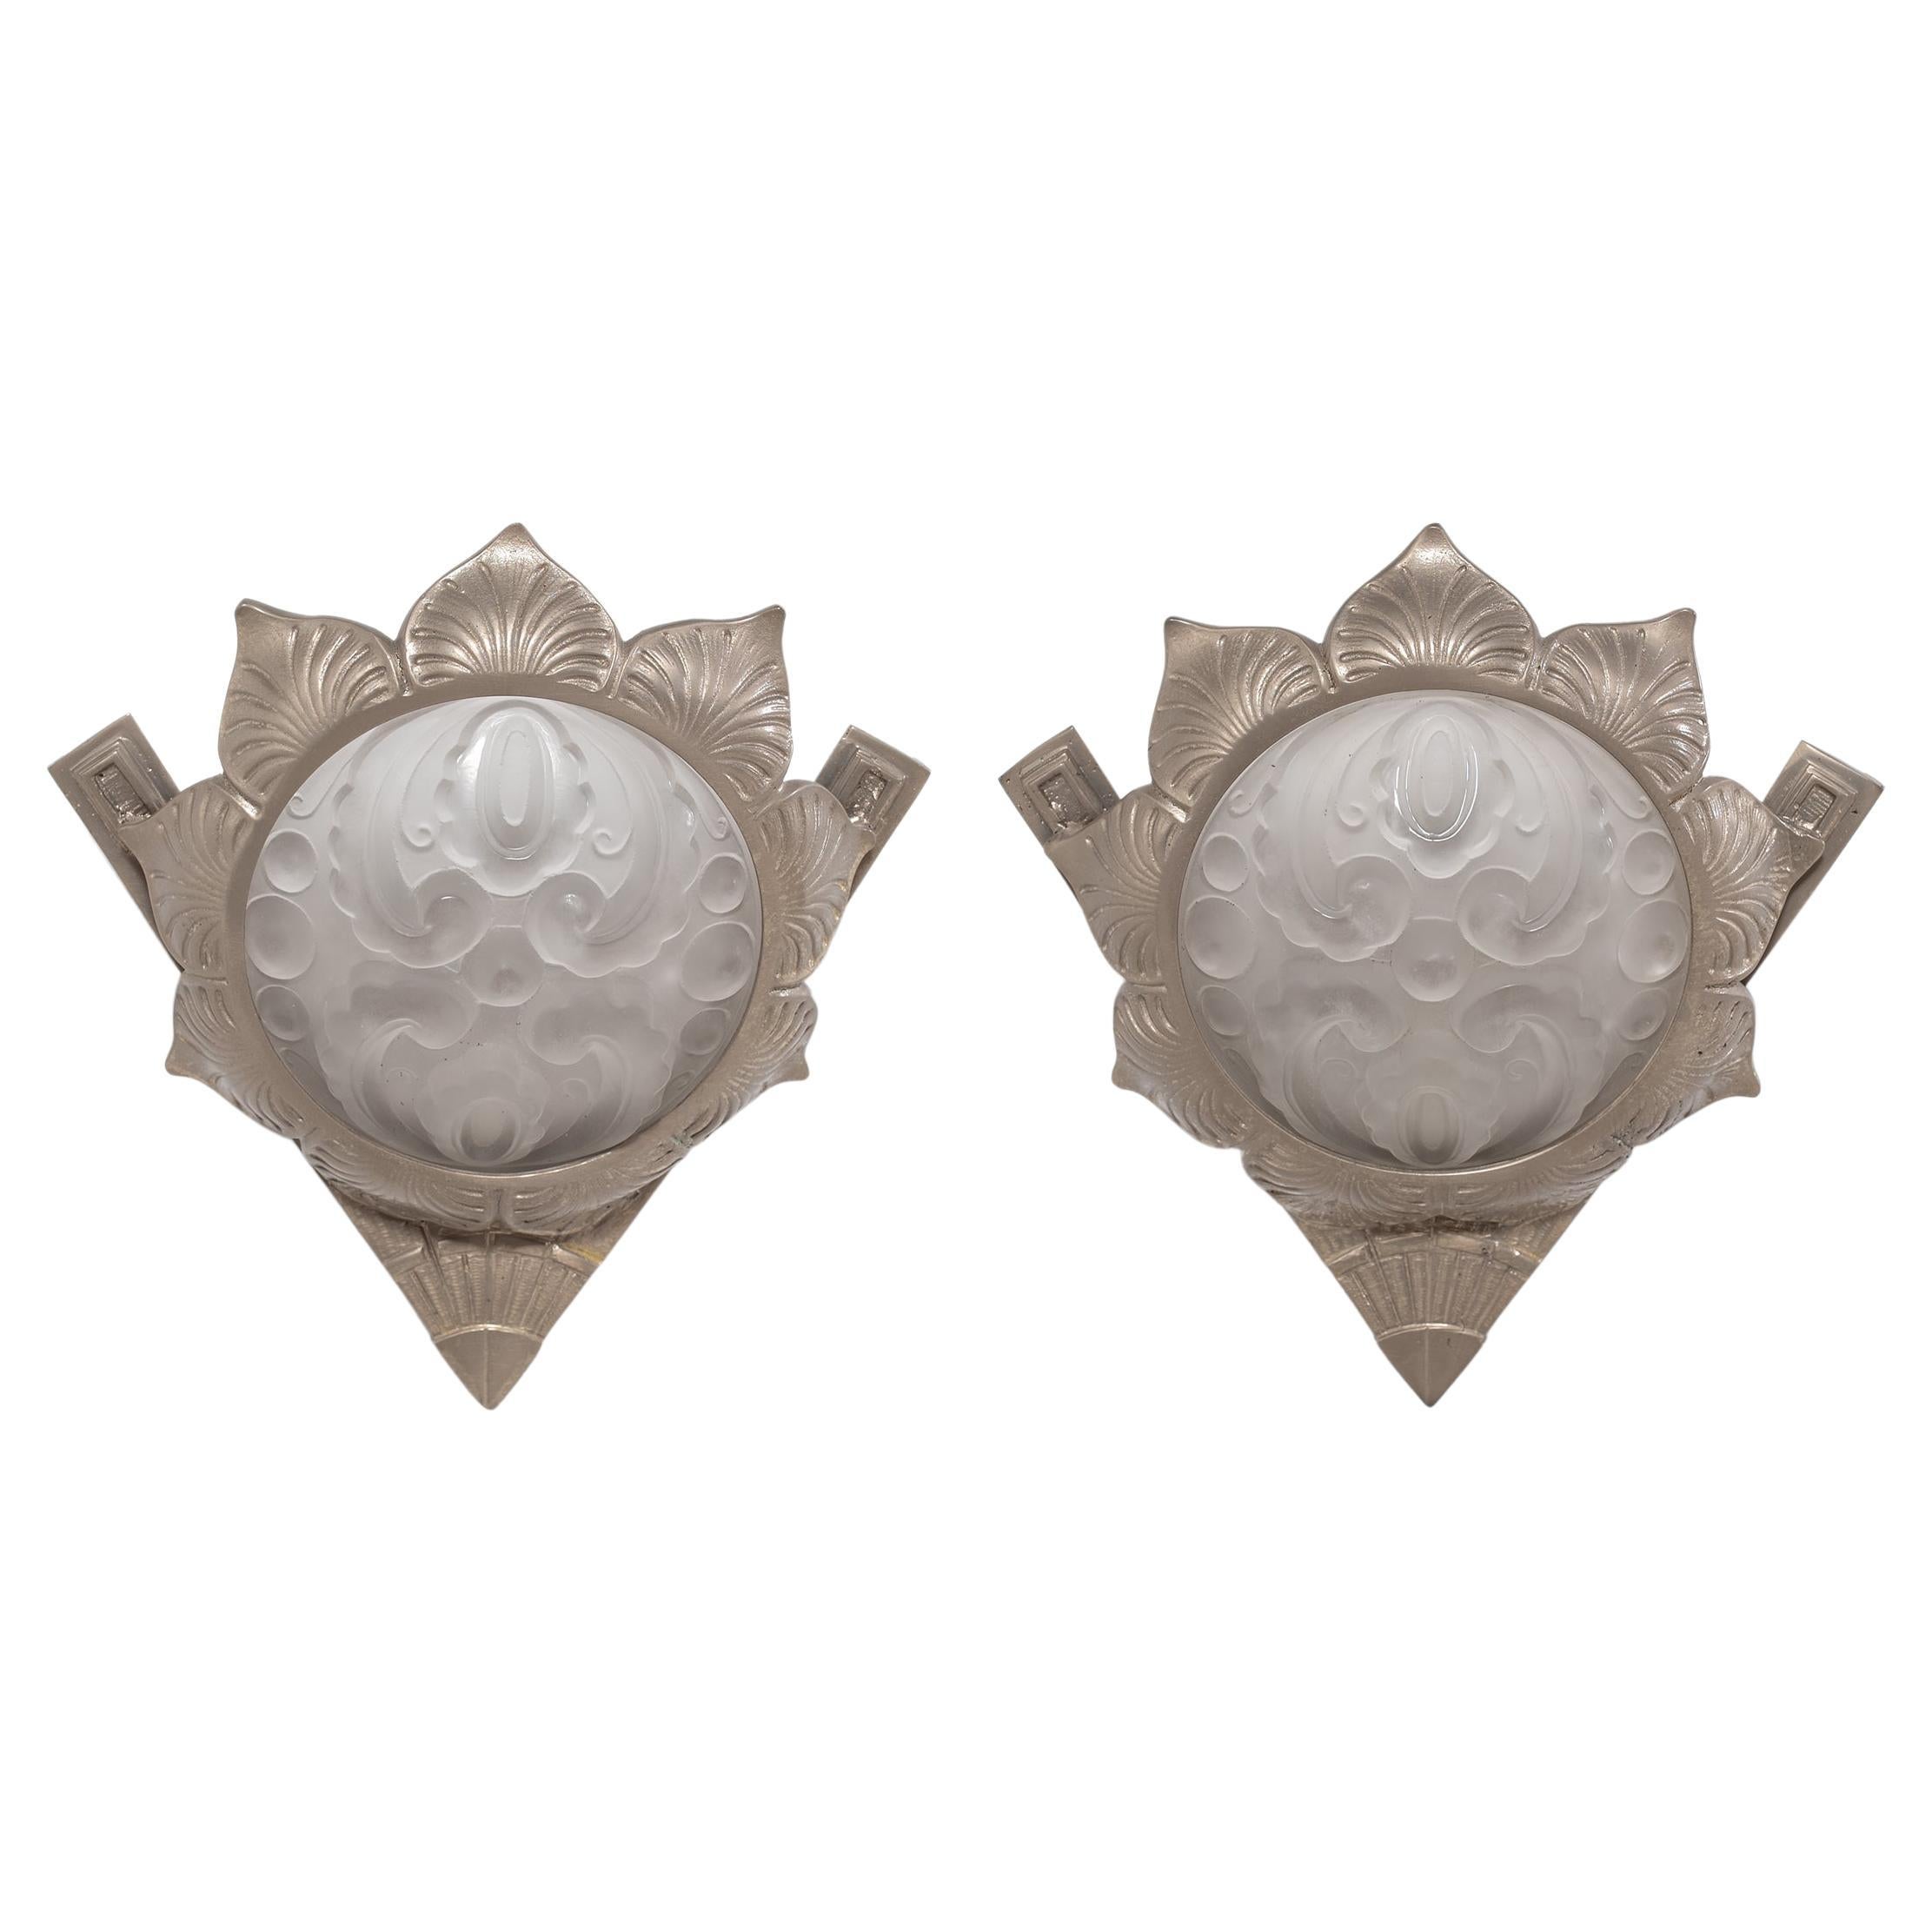 Pair of French Deco Sunflower Wall Sconces, c. 1930 For Sale